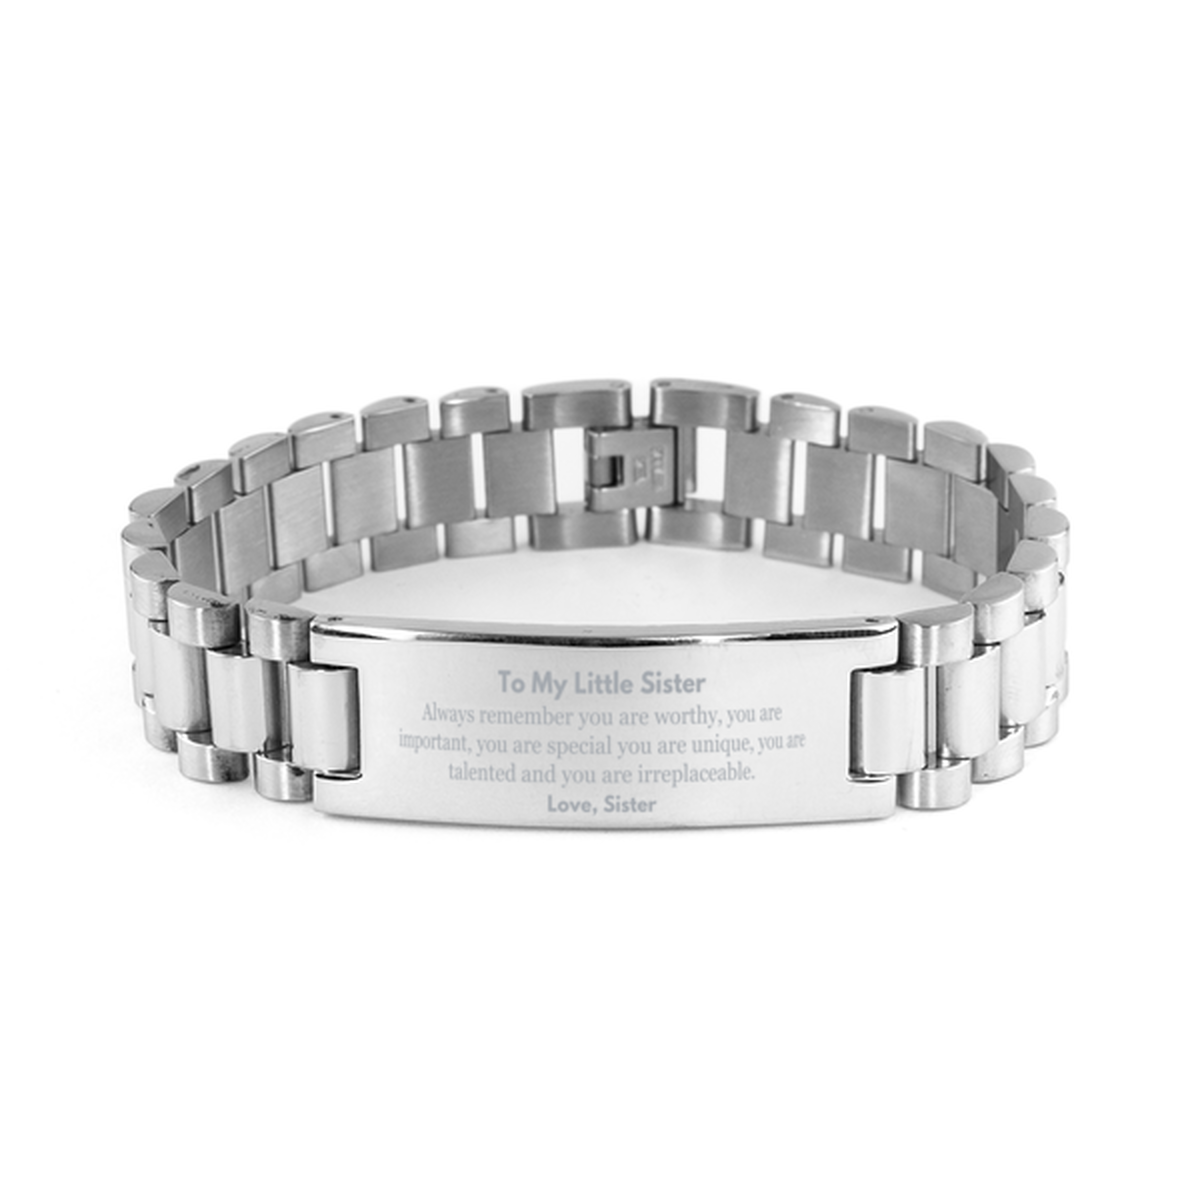 Little Sister Birthday Gifts from Sister, Inspirational Ladder Stainless Steel Bracelet for Little Sister Christmas Graduation Gifts for Little Sister Always remember you are worthy, you are important. Love, Sister